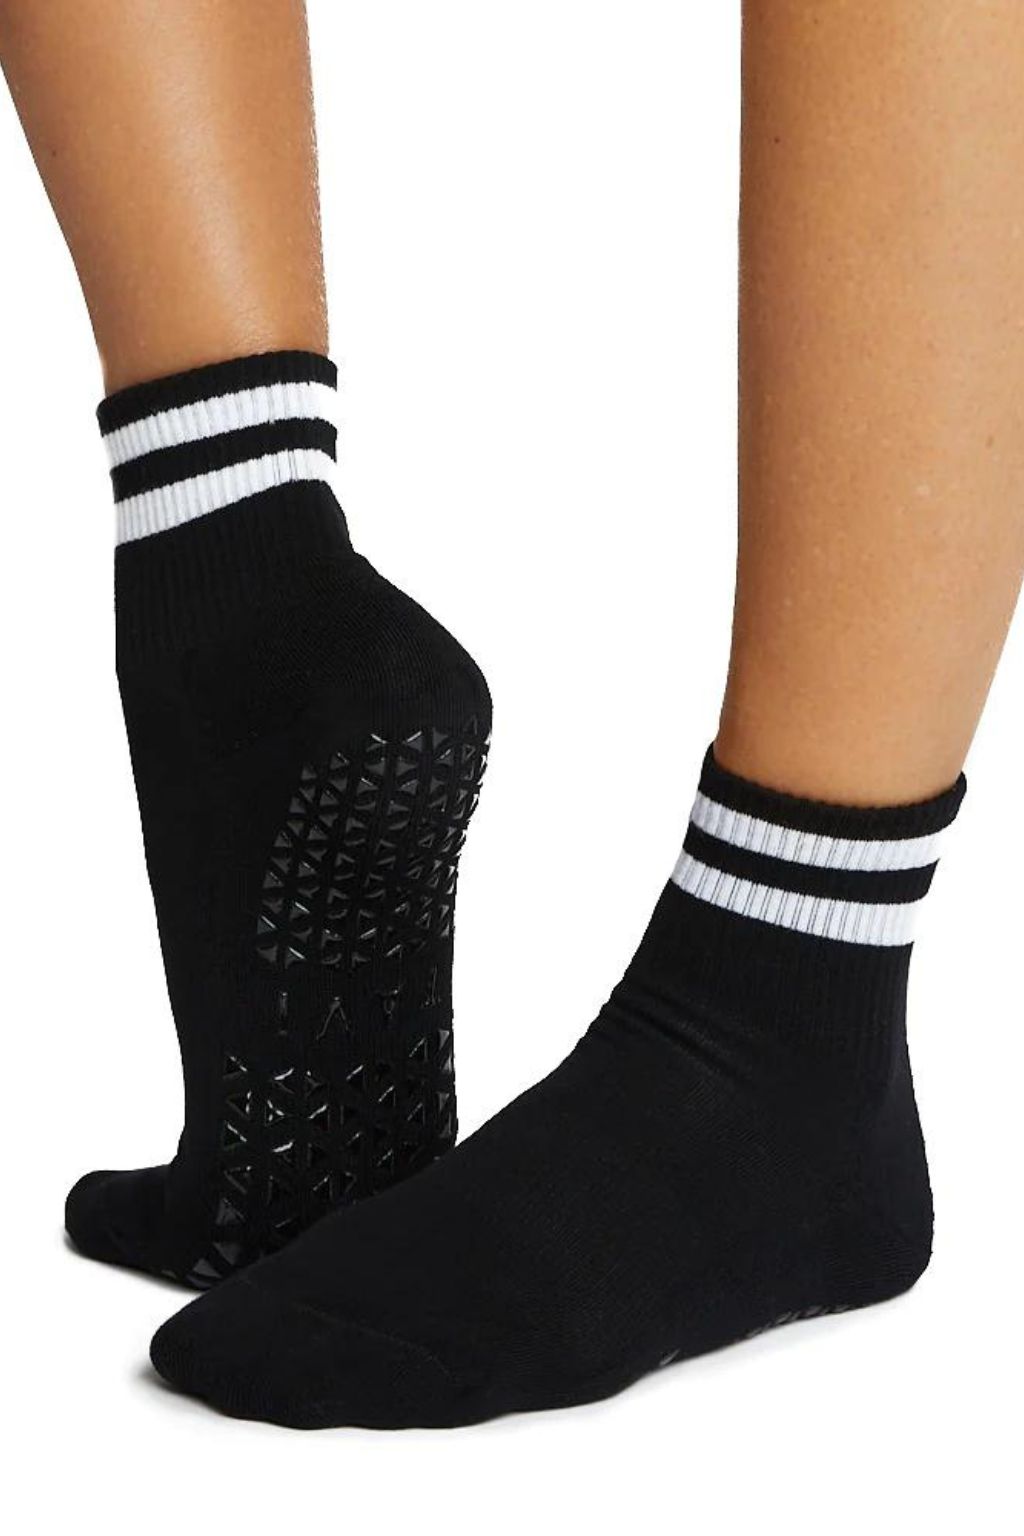 High density black rubber grip activewear socks for yoga, pilates, gym, and exercise from Tavi featured by sustainable women's activewear brand Jilla Active   